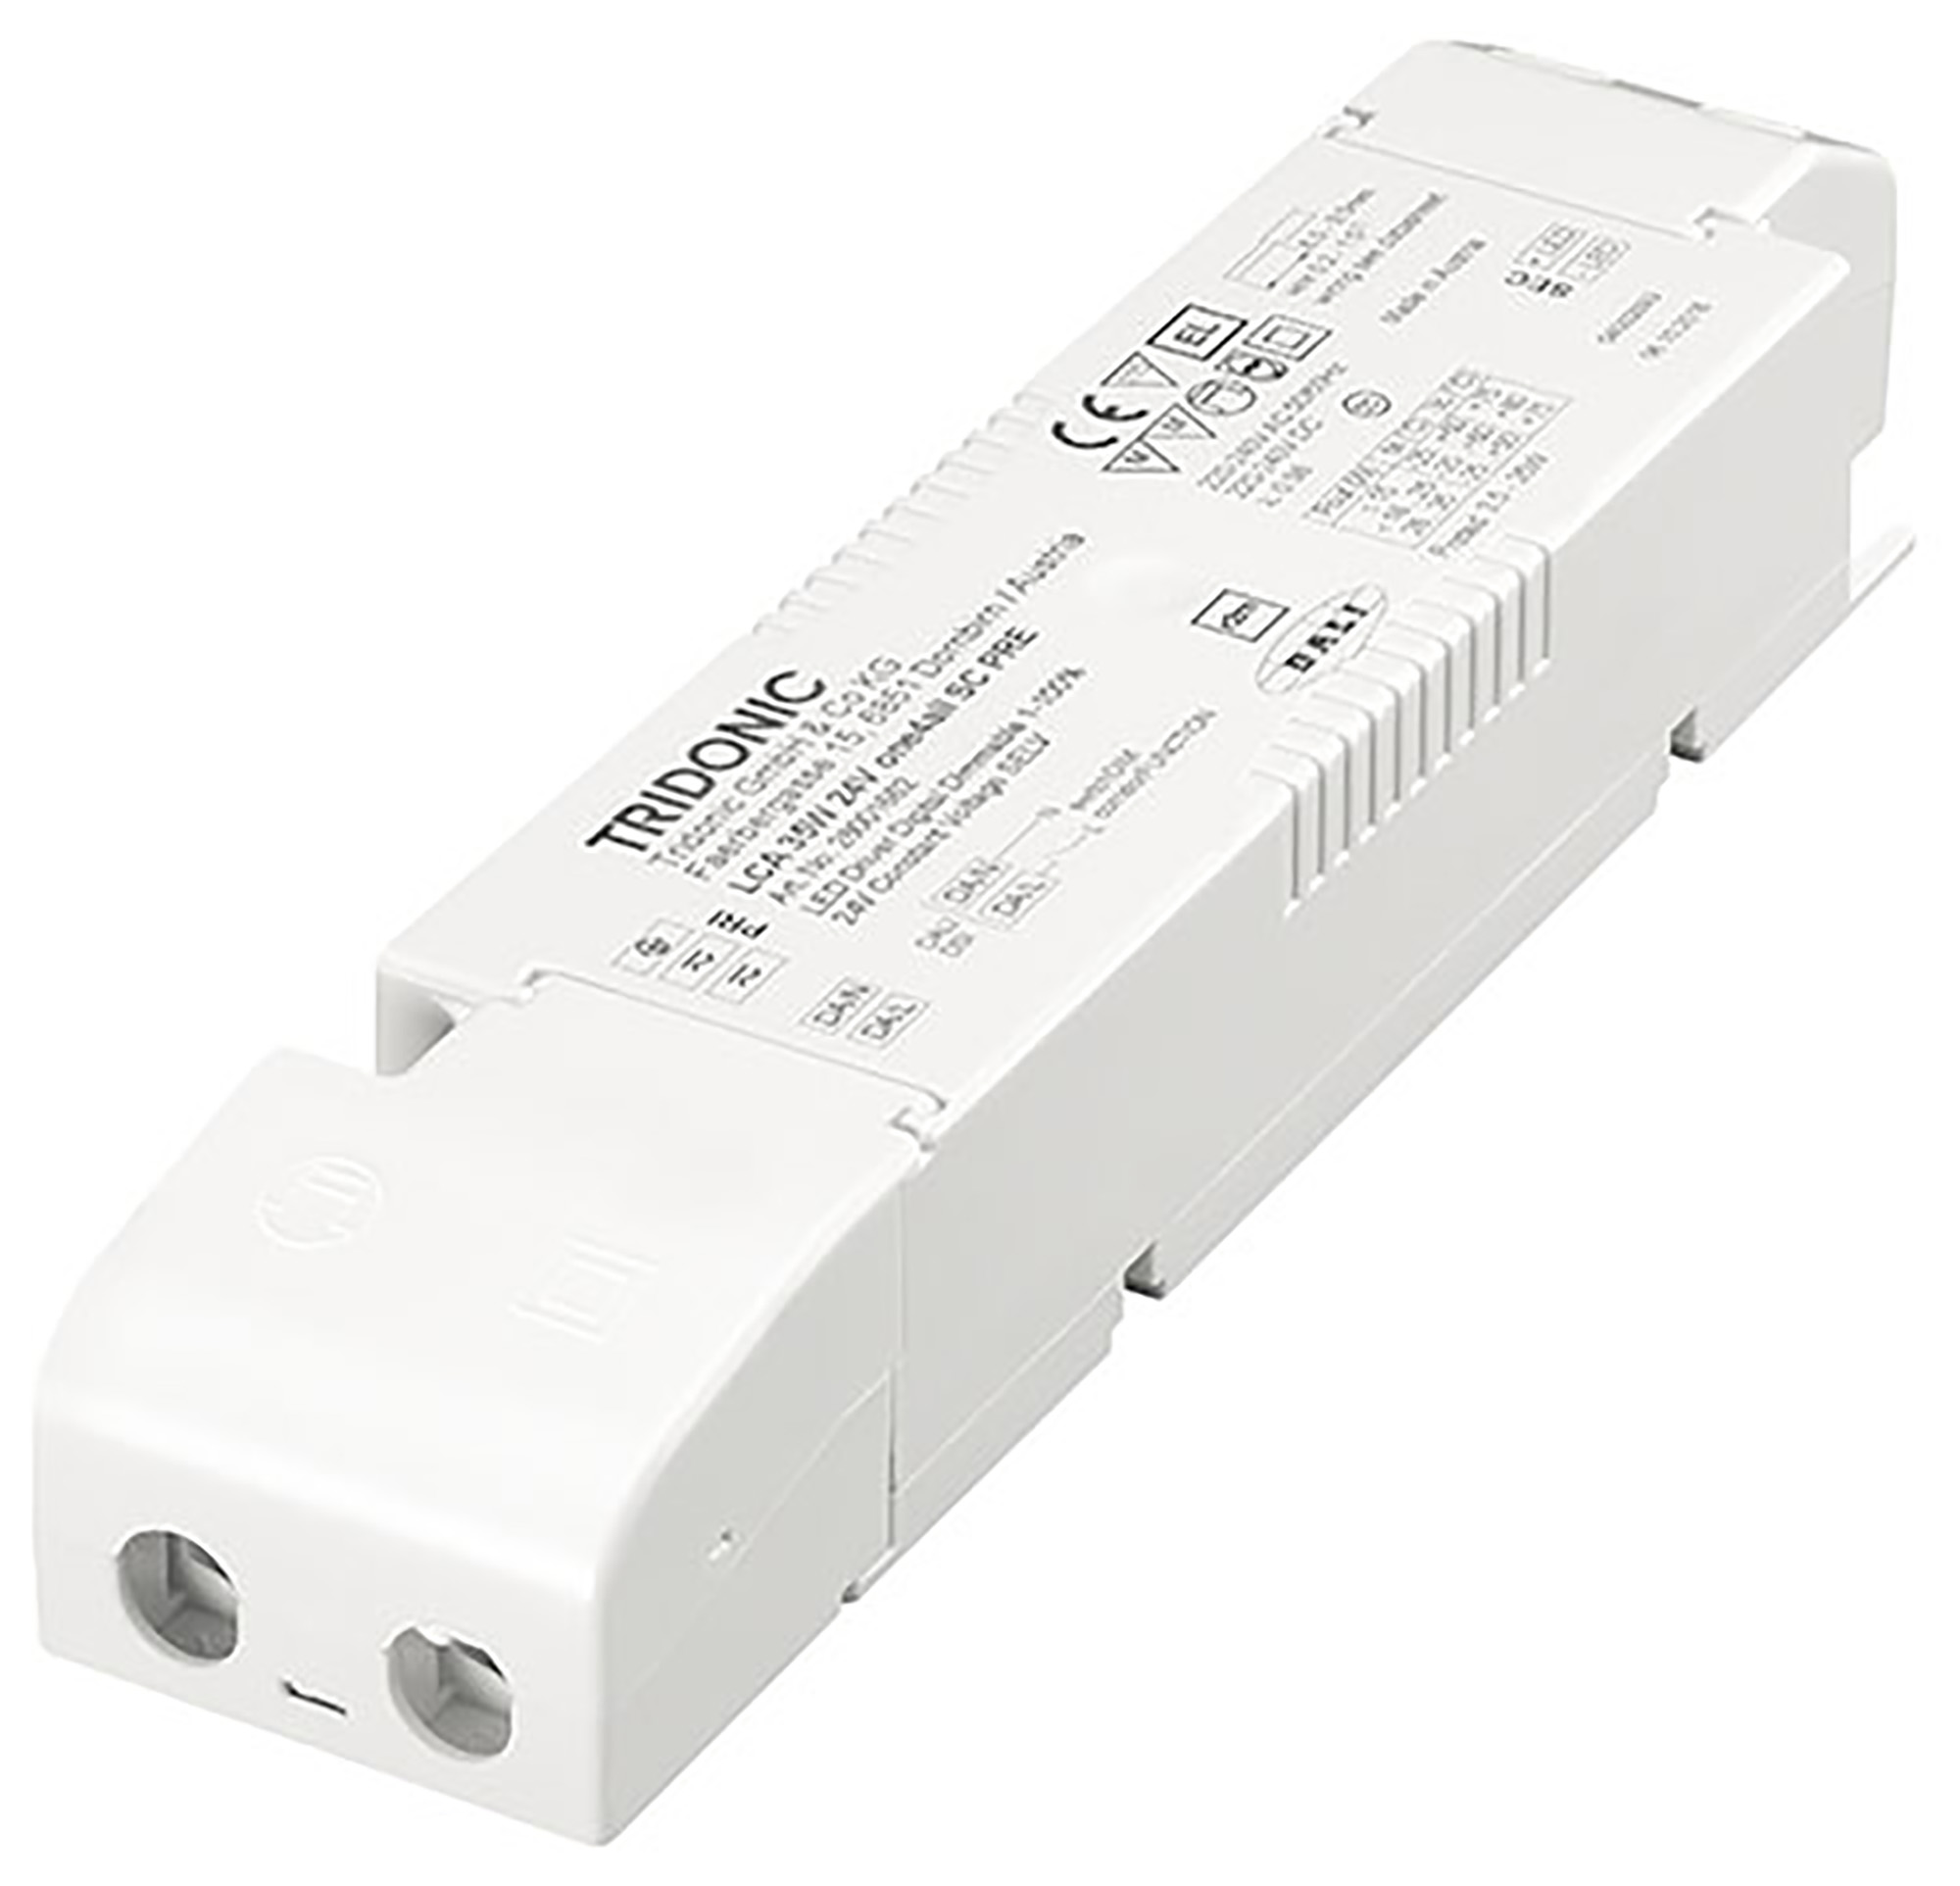 28001920  35W 24V one4all Dimmable SC PRE SP Constant Voltage LED Driver